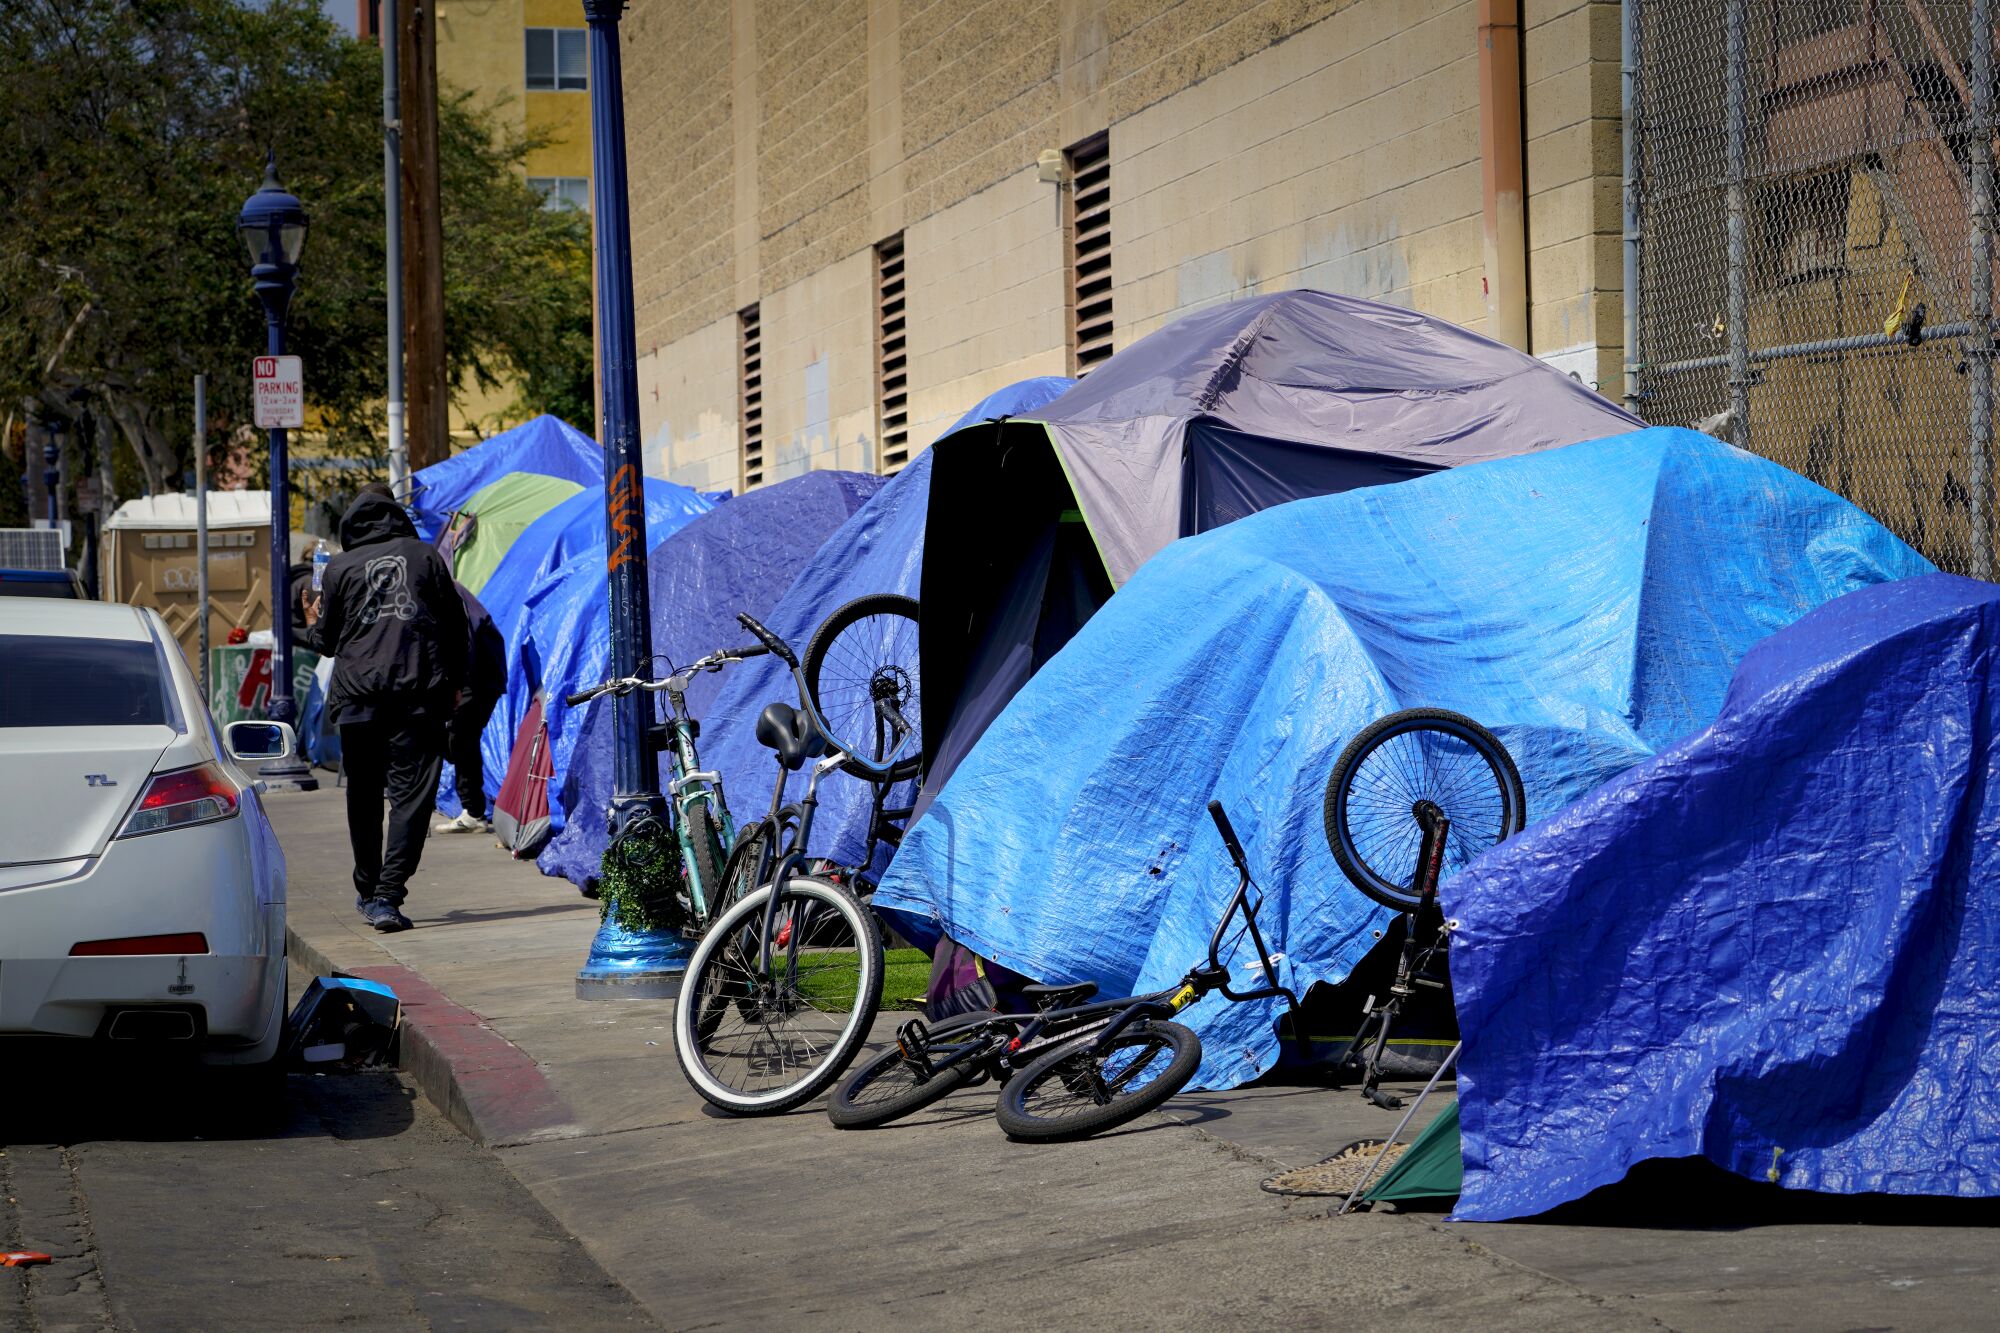 Rows of tents along 16th Street in downtown San Diego on Wednesday, May 18, 2022.